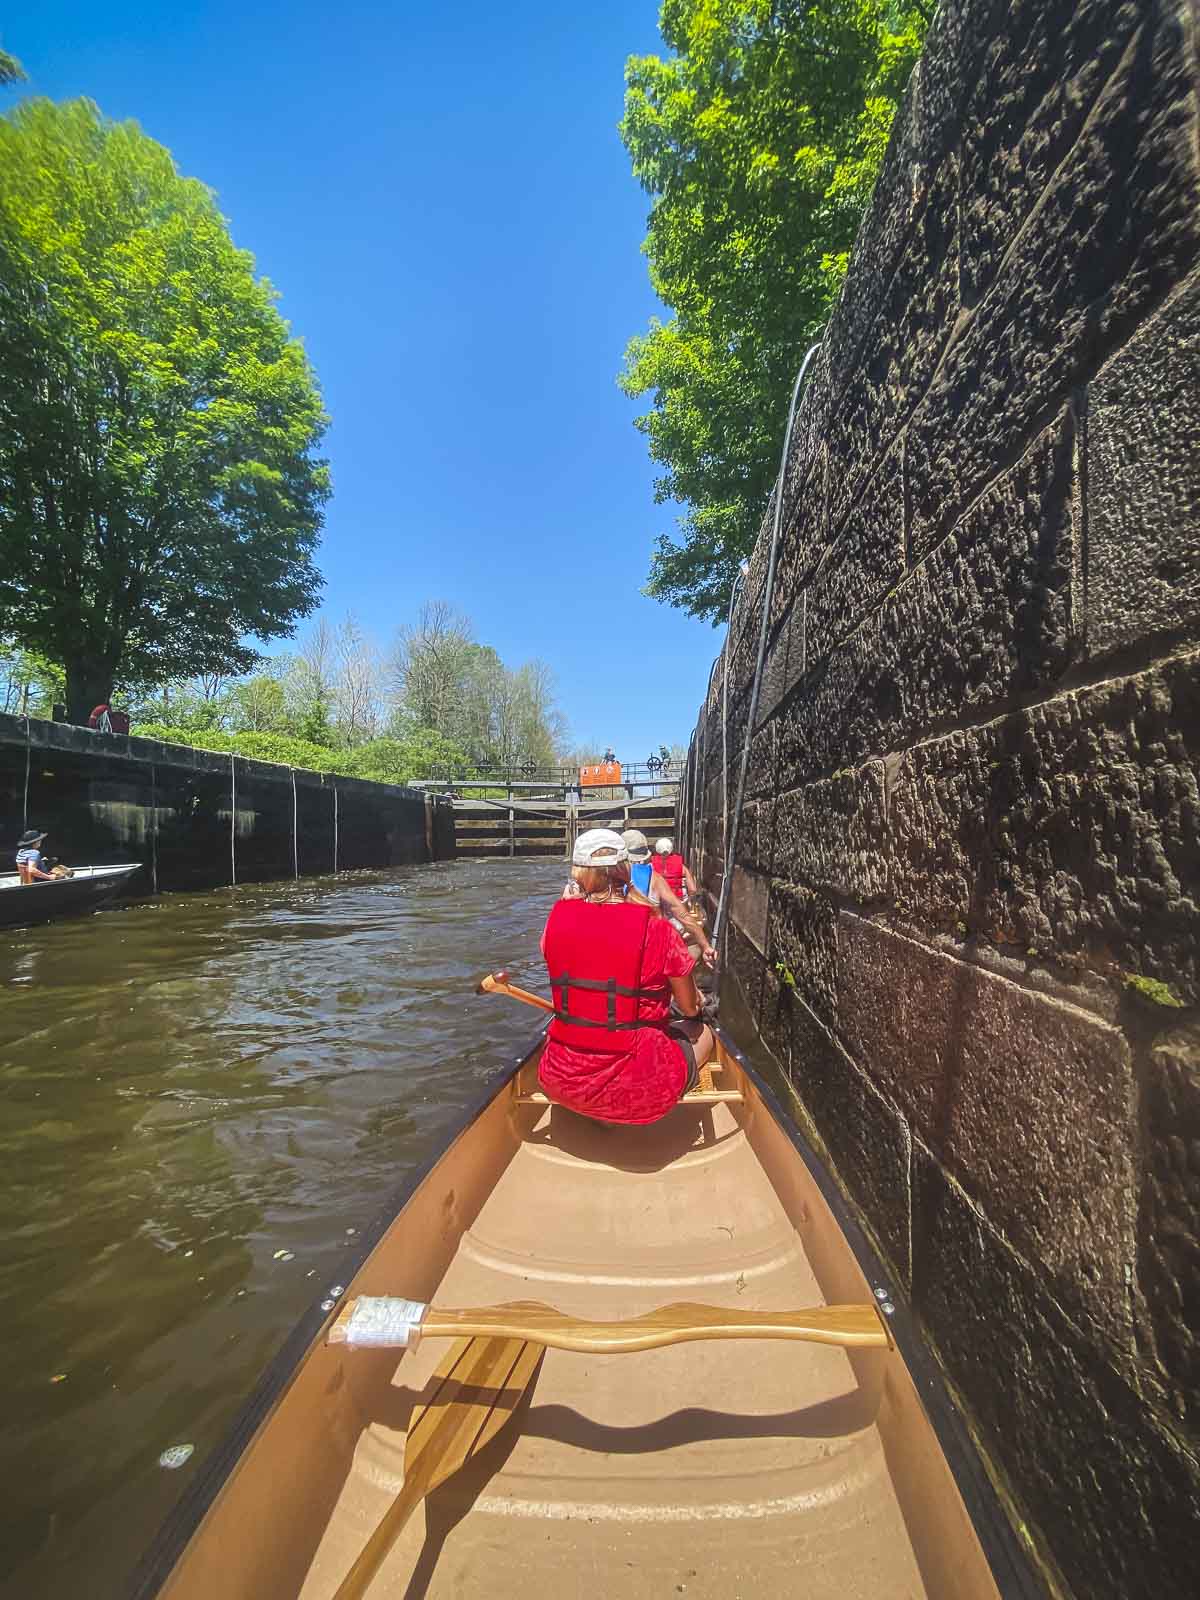 Places to visit on the Rideau Canal Bevridges Lock